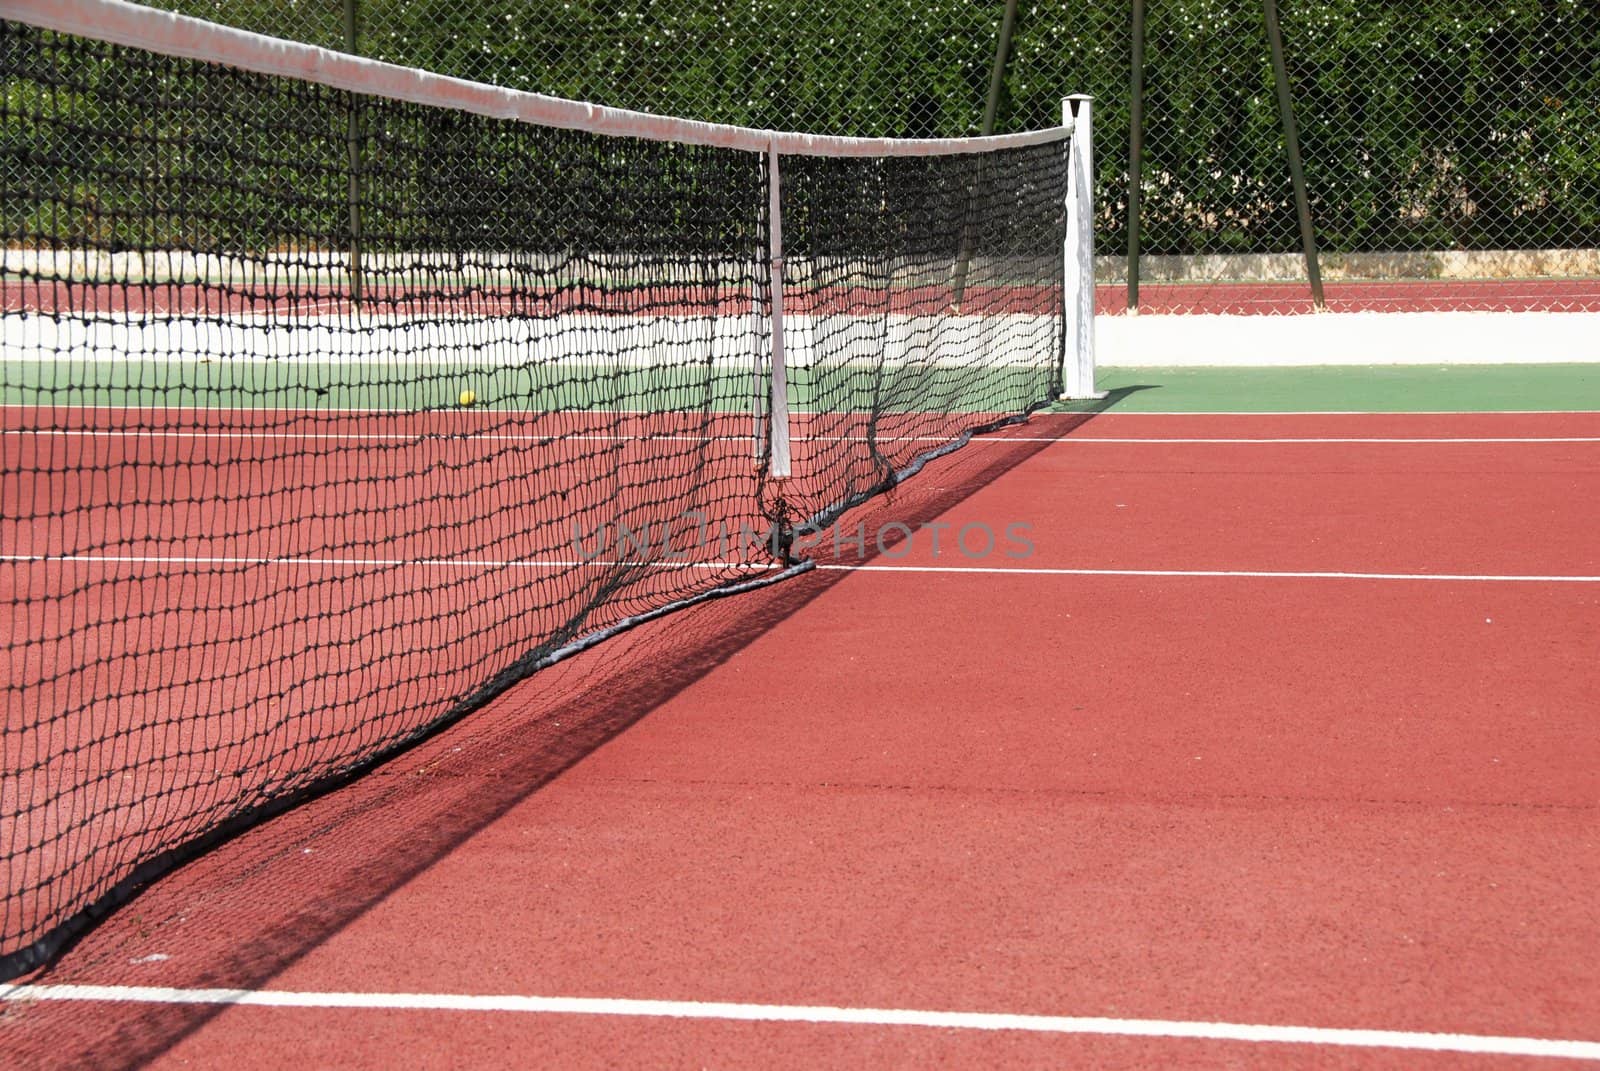 Tennis court by simply